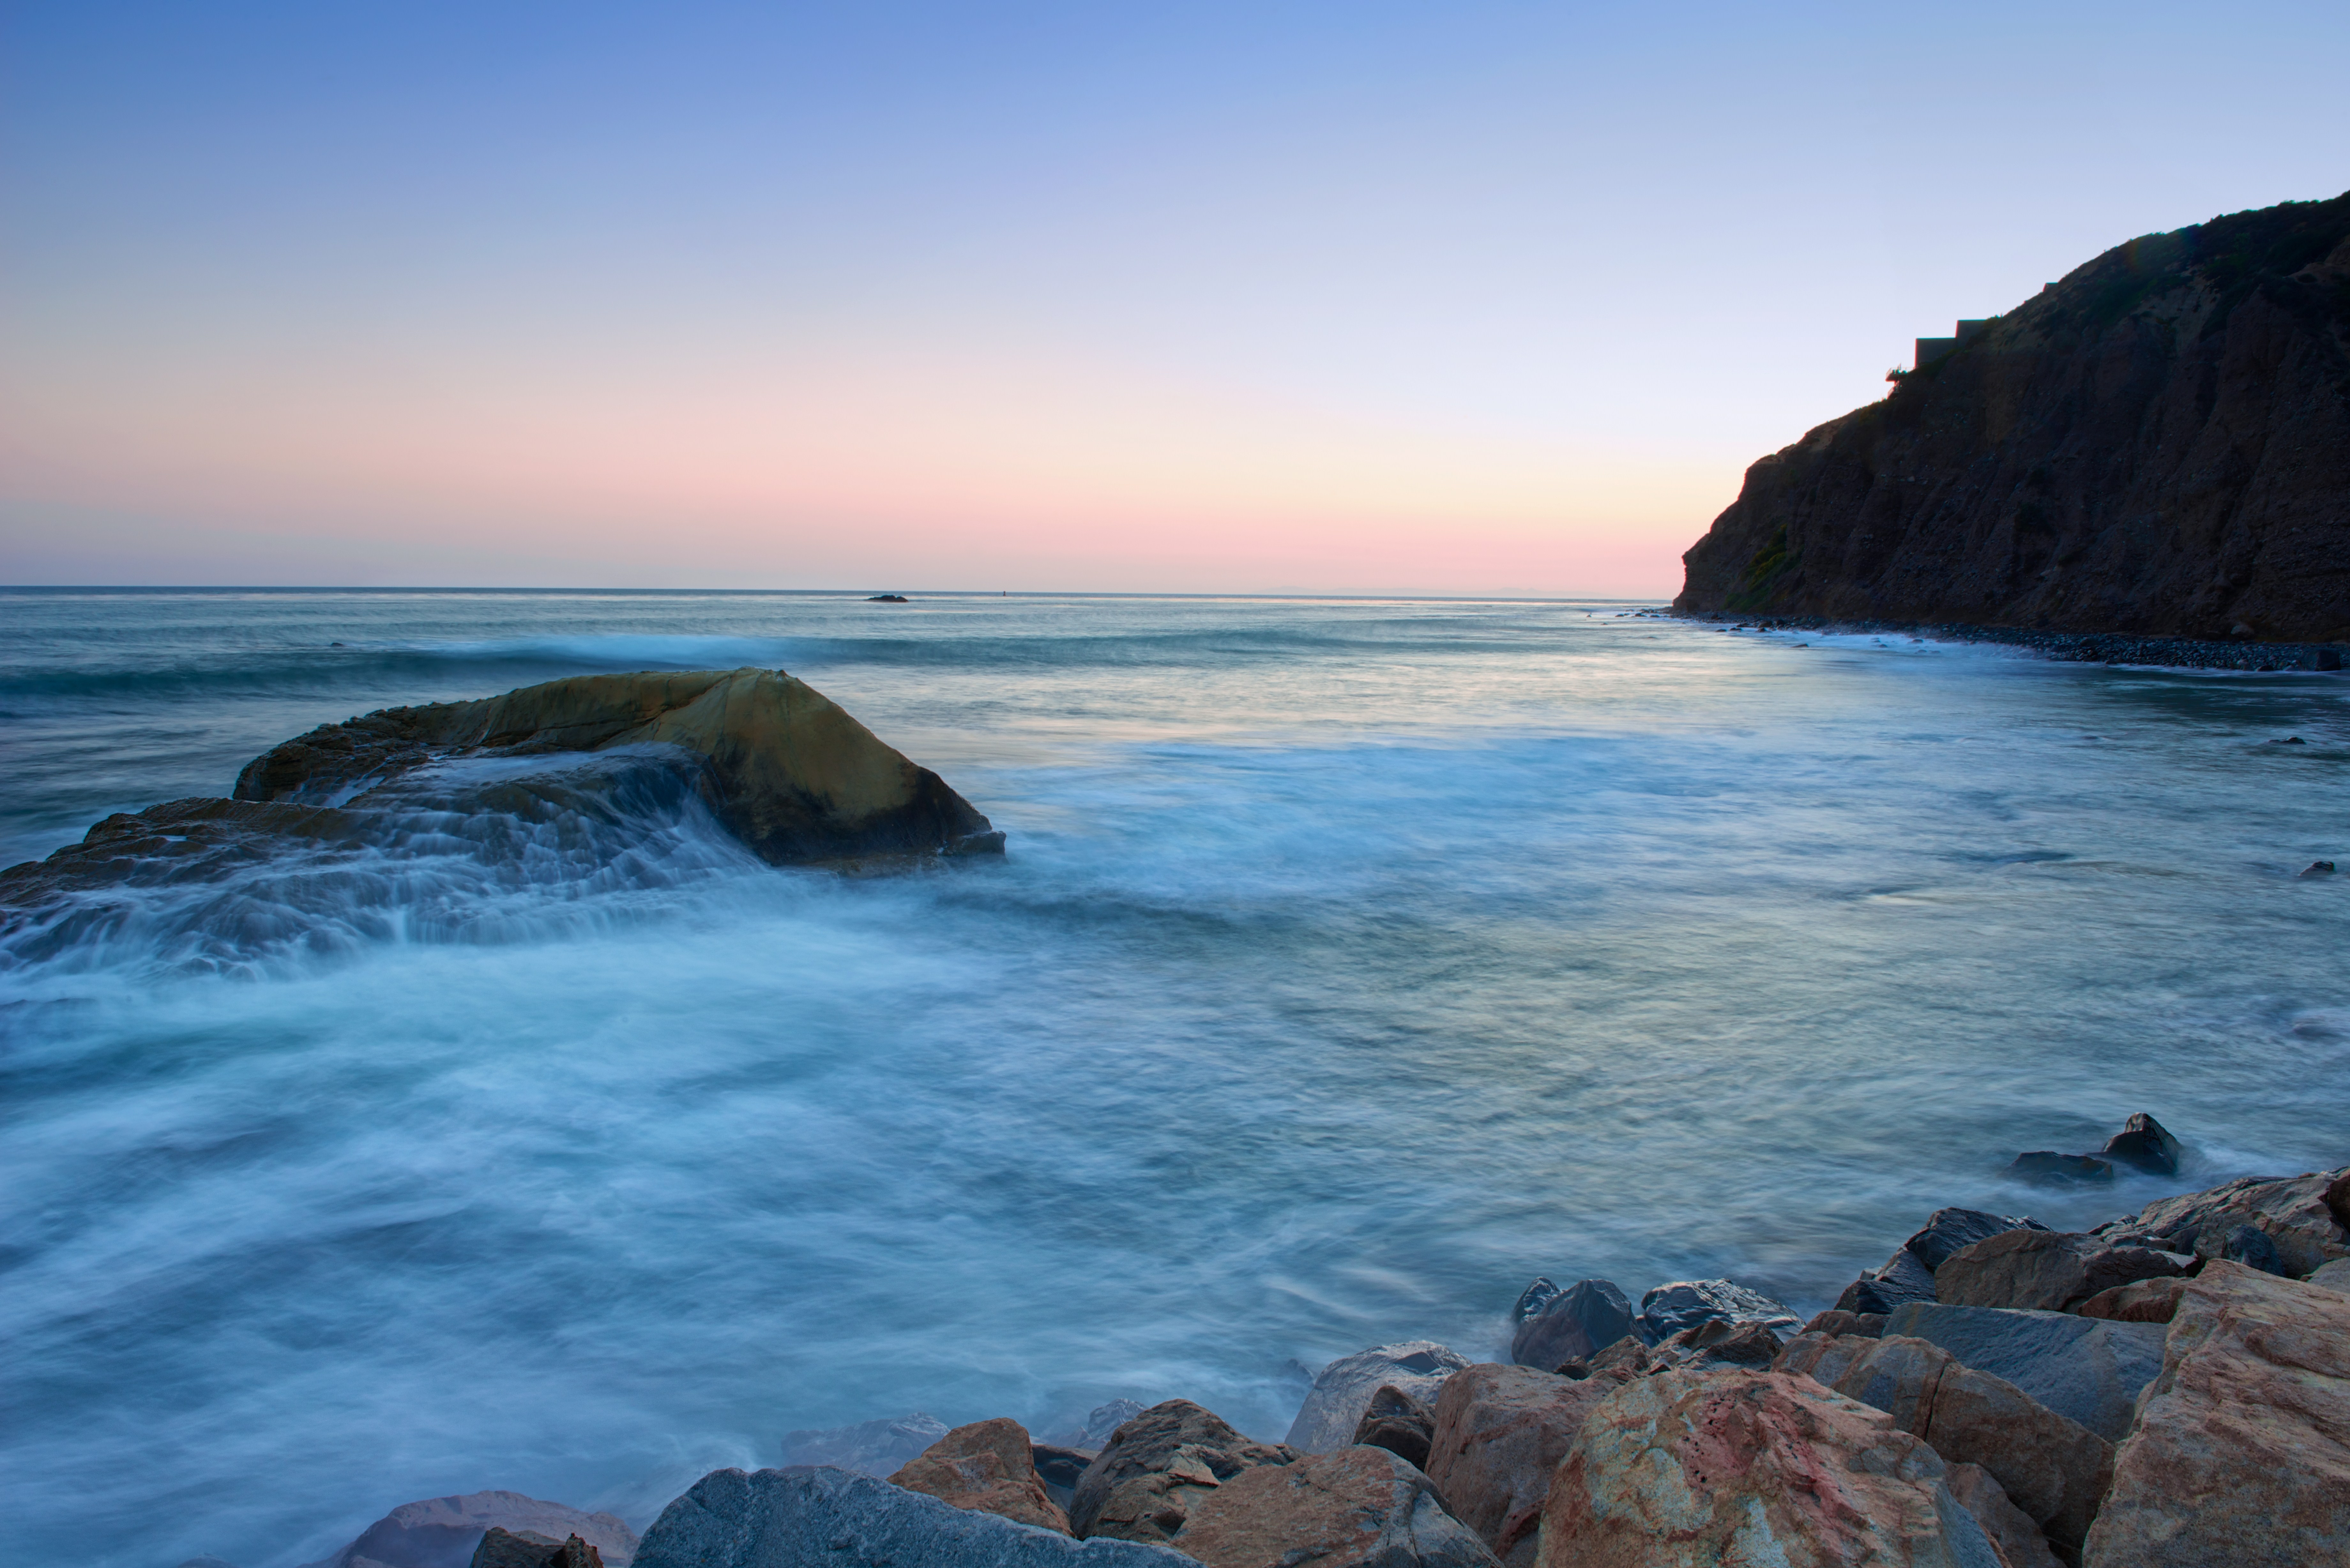 The Pacific Ocean bordered by rocks on the California coastline at dusk.